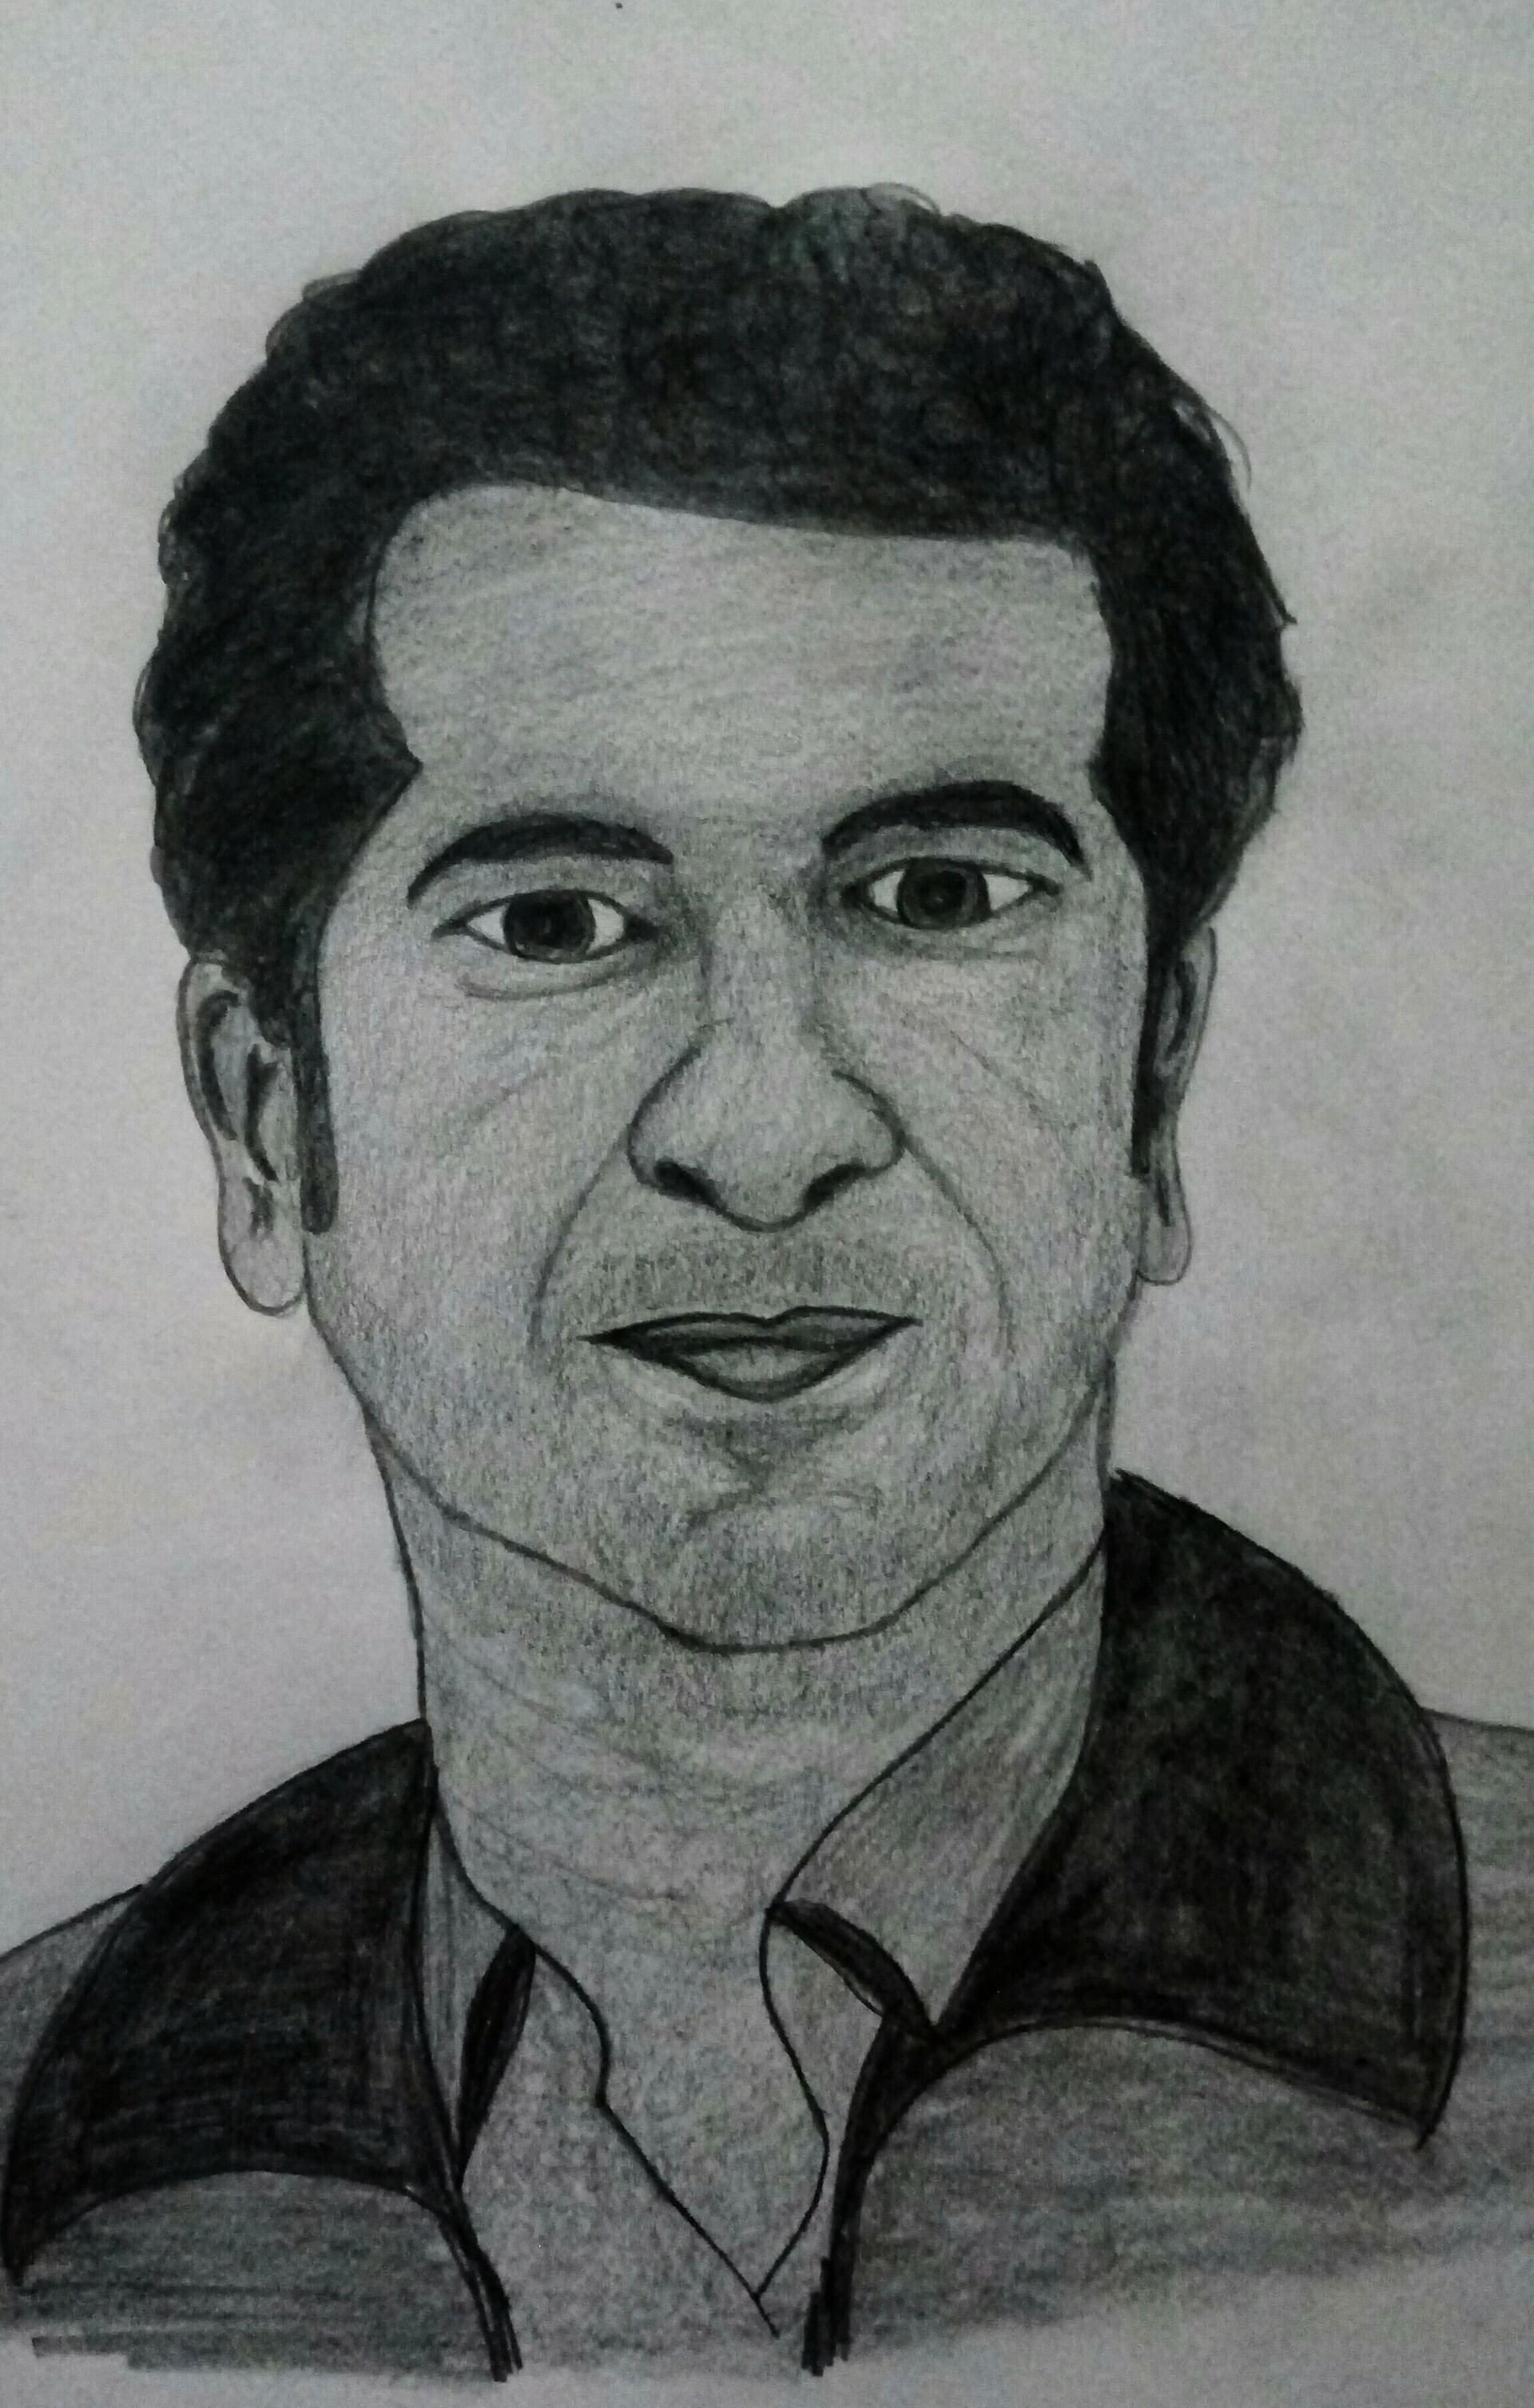 Sachin Tendulkar  I made this sketch when I was about 13 ye  Flickr